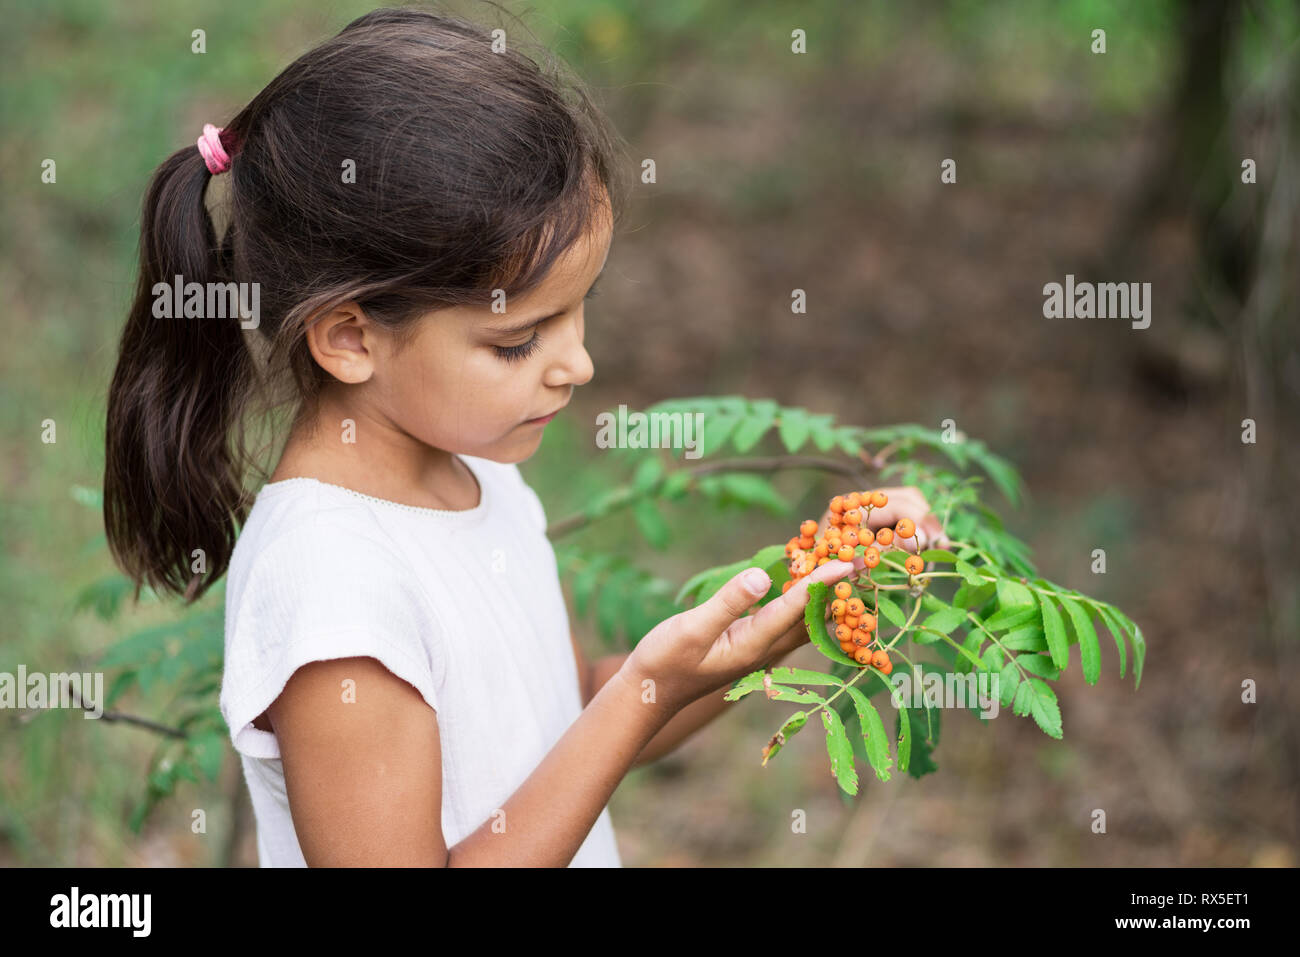 The young girl is looking at rowan berries. Blurred nature background. Stock Photo